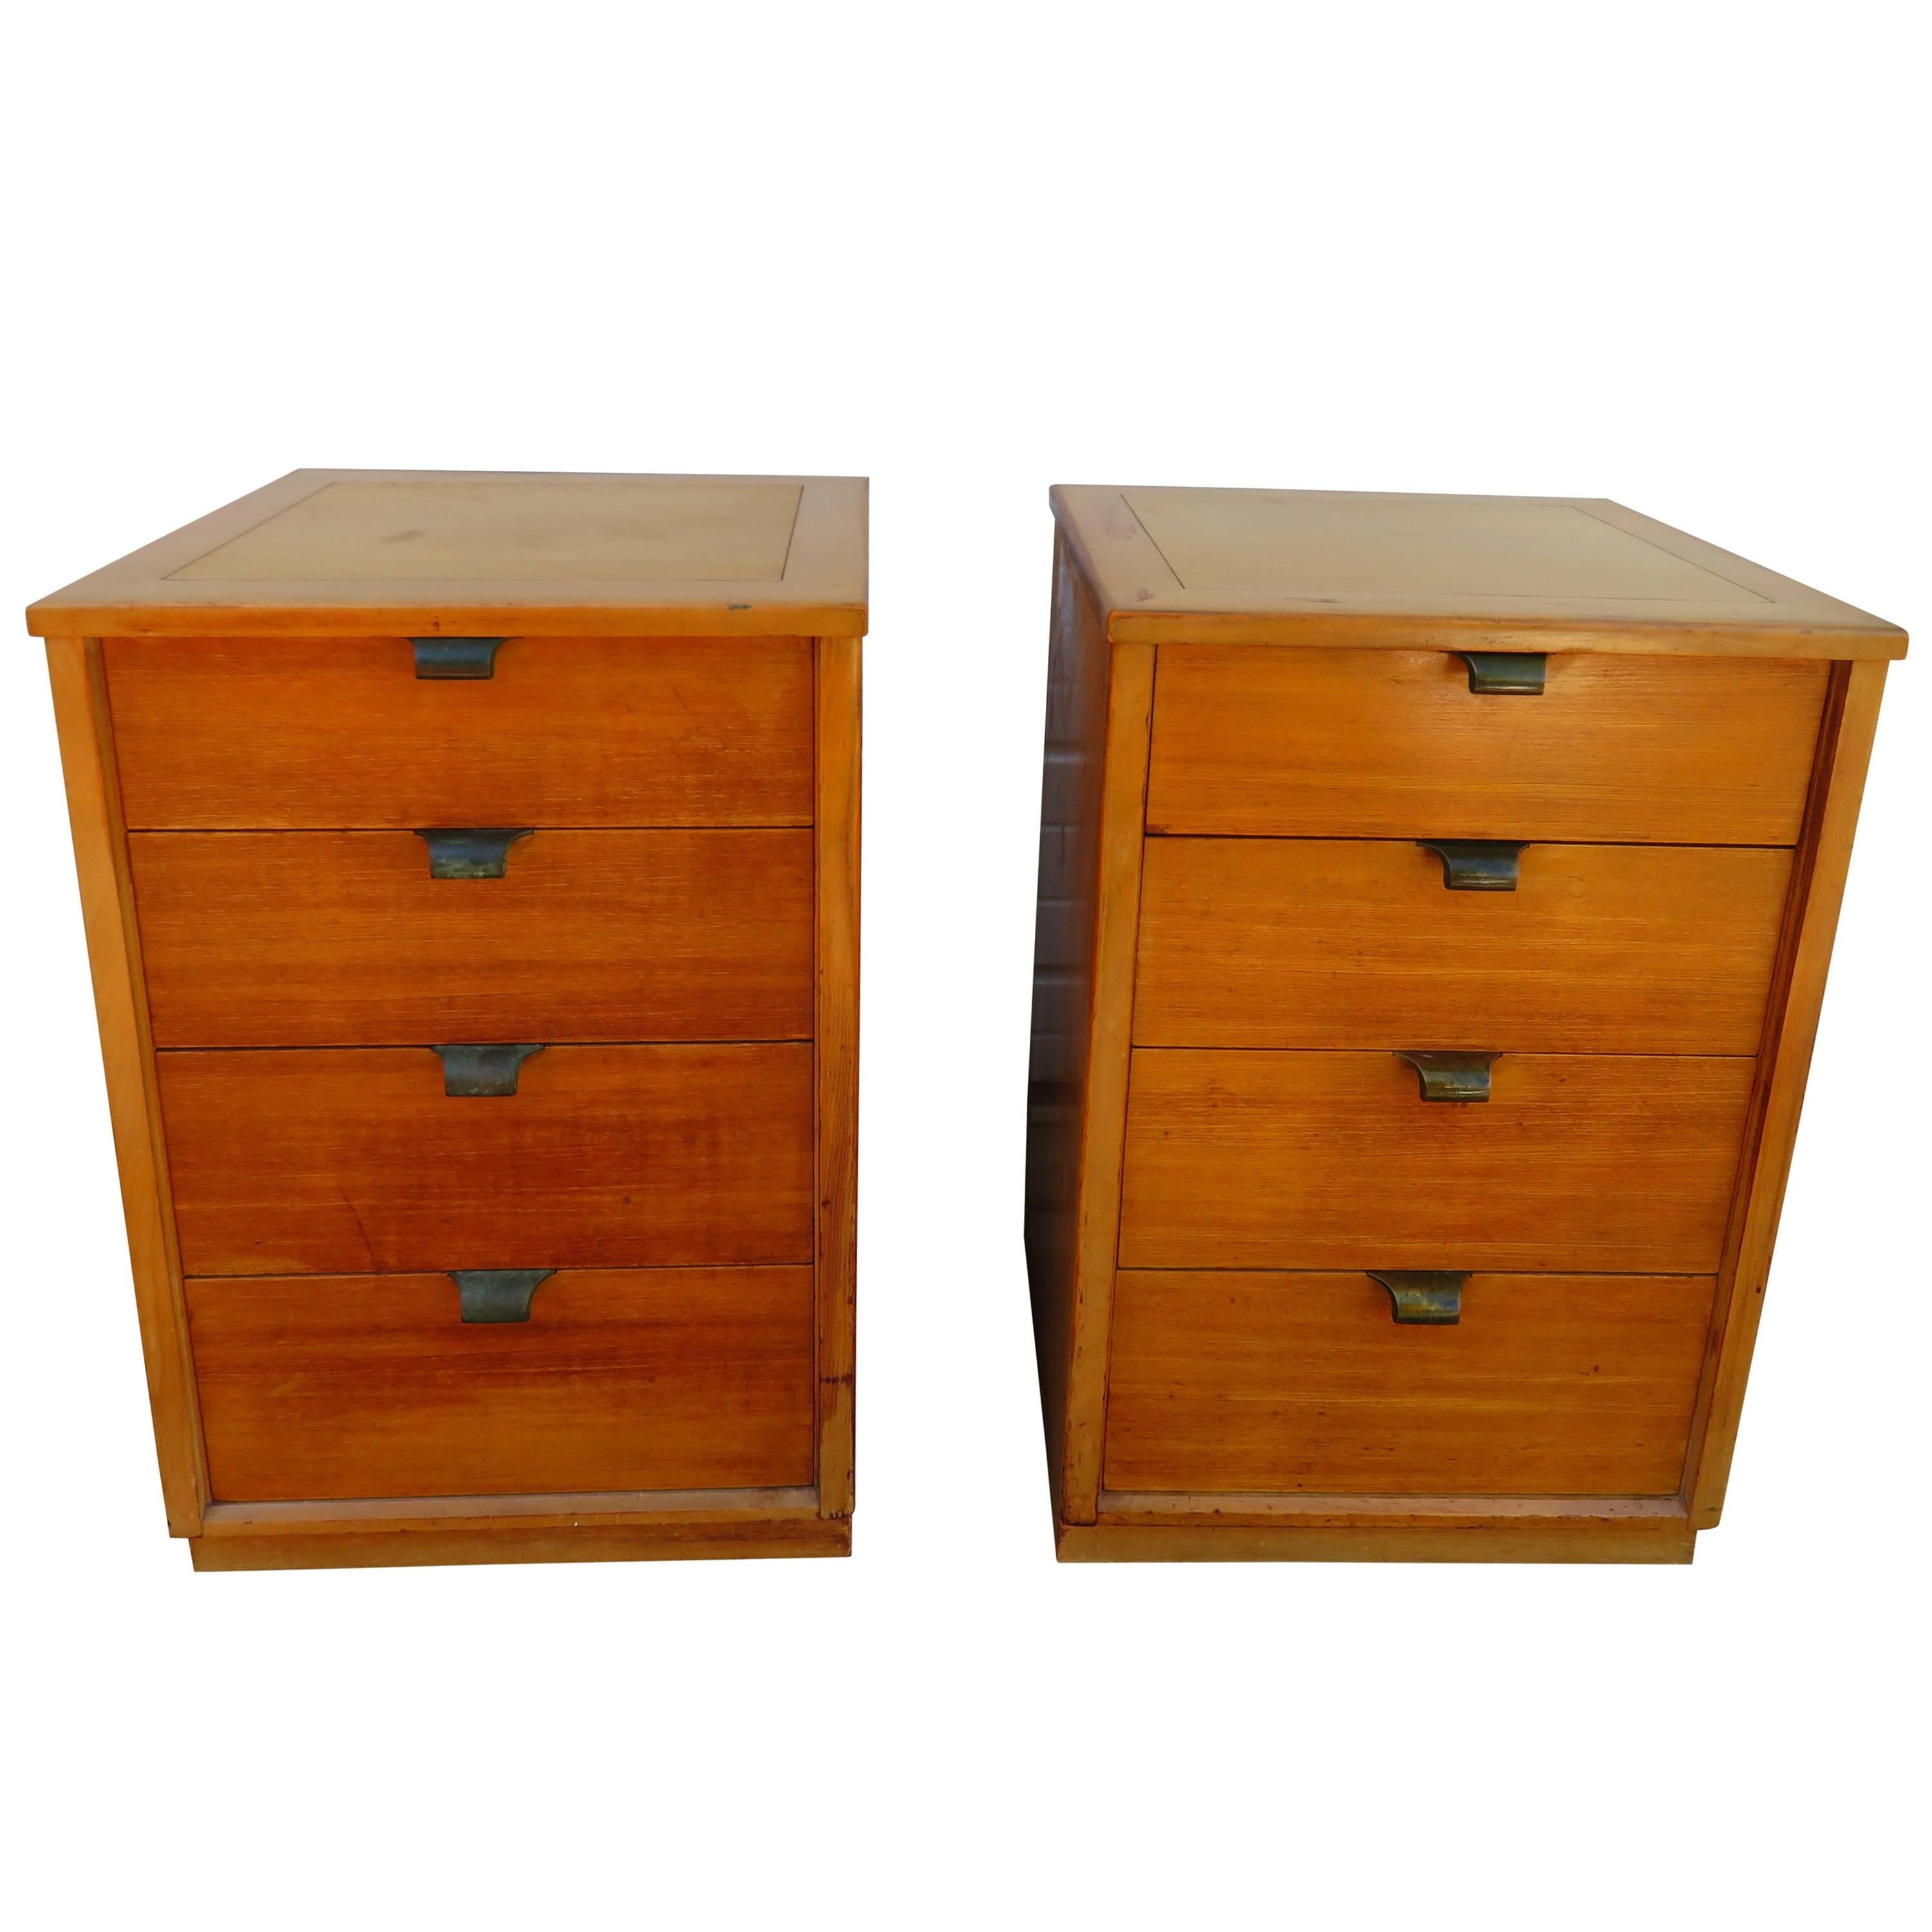 Lovely Pair of Edward Wormley for Drexel Precedent Nightstand Mid-Century Modern